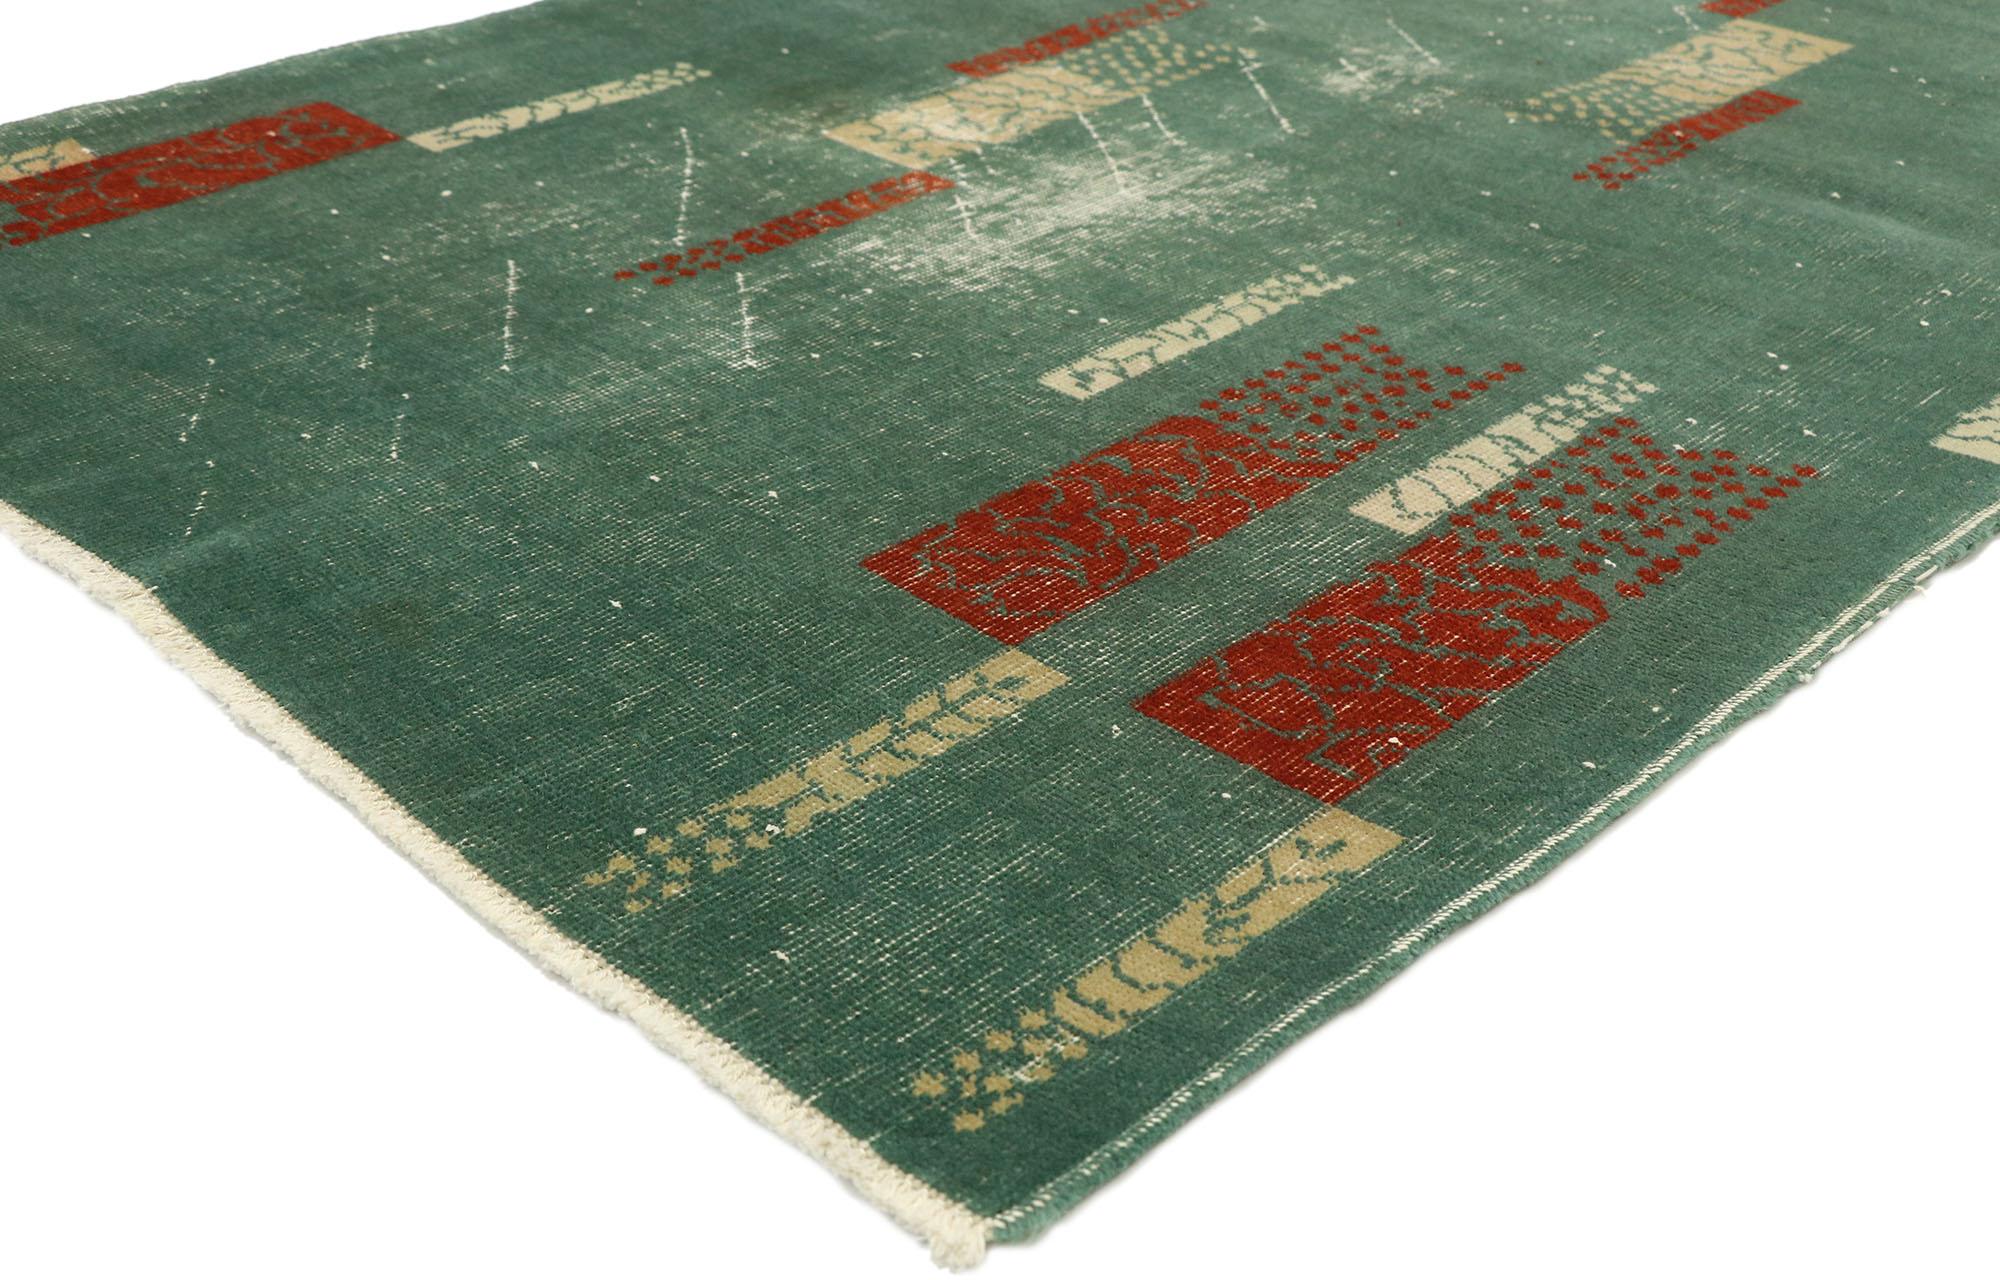 51582 Zeki Mu¨ren distressed vintage Turkish Sivas rug with Linear Abstract style. Reflecting artistic elements of abstract art with expressionism vibes, this hand knotted wool distressed vintage Turkish Sivas rug awakens the soul with elevated